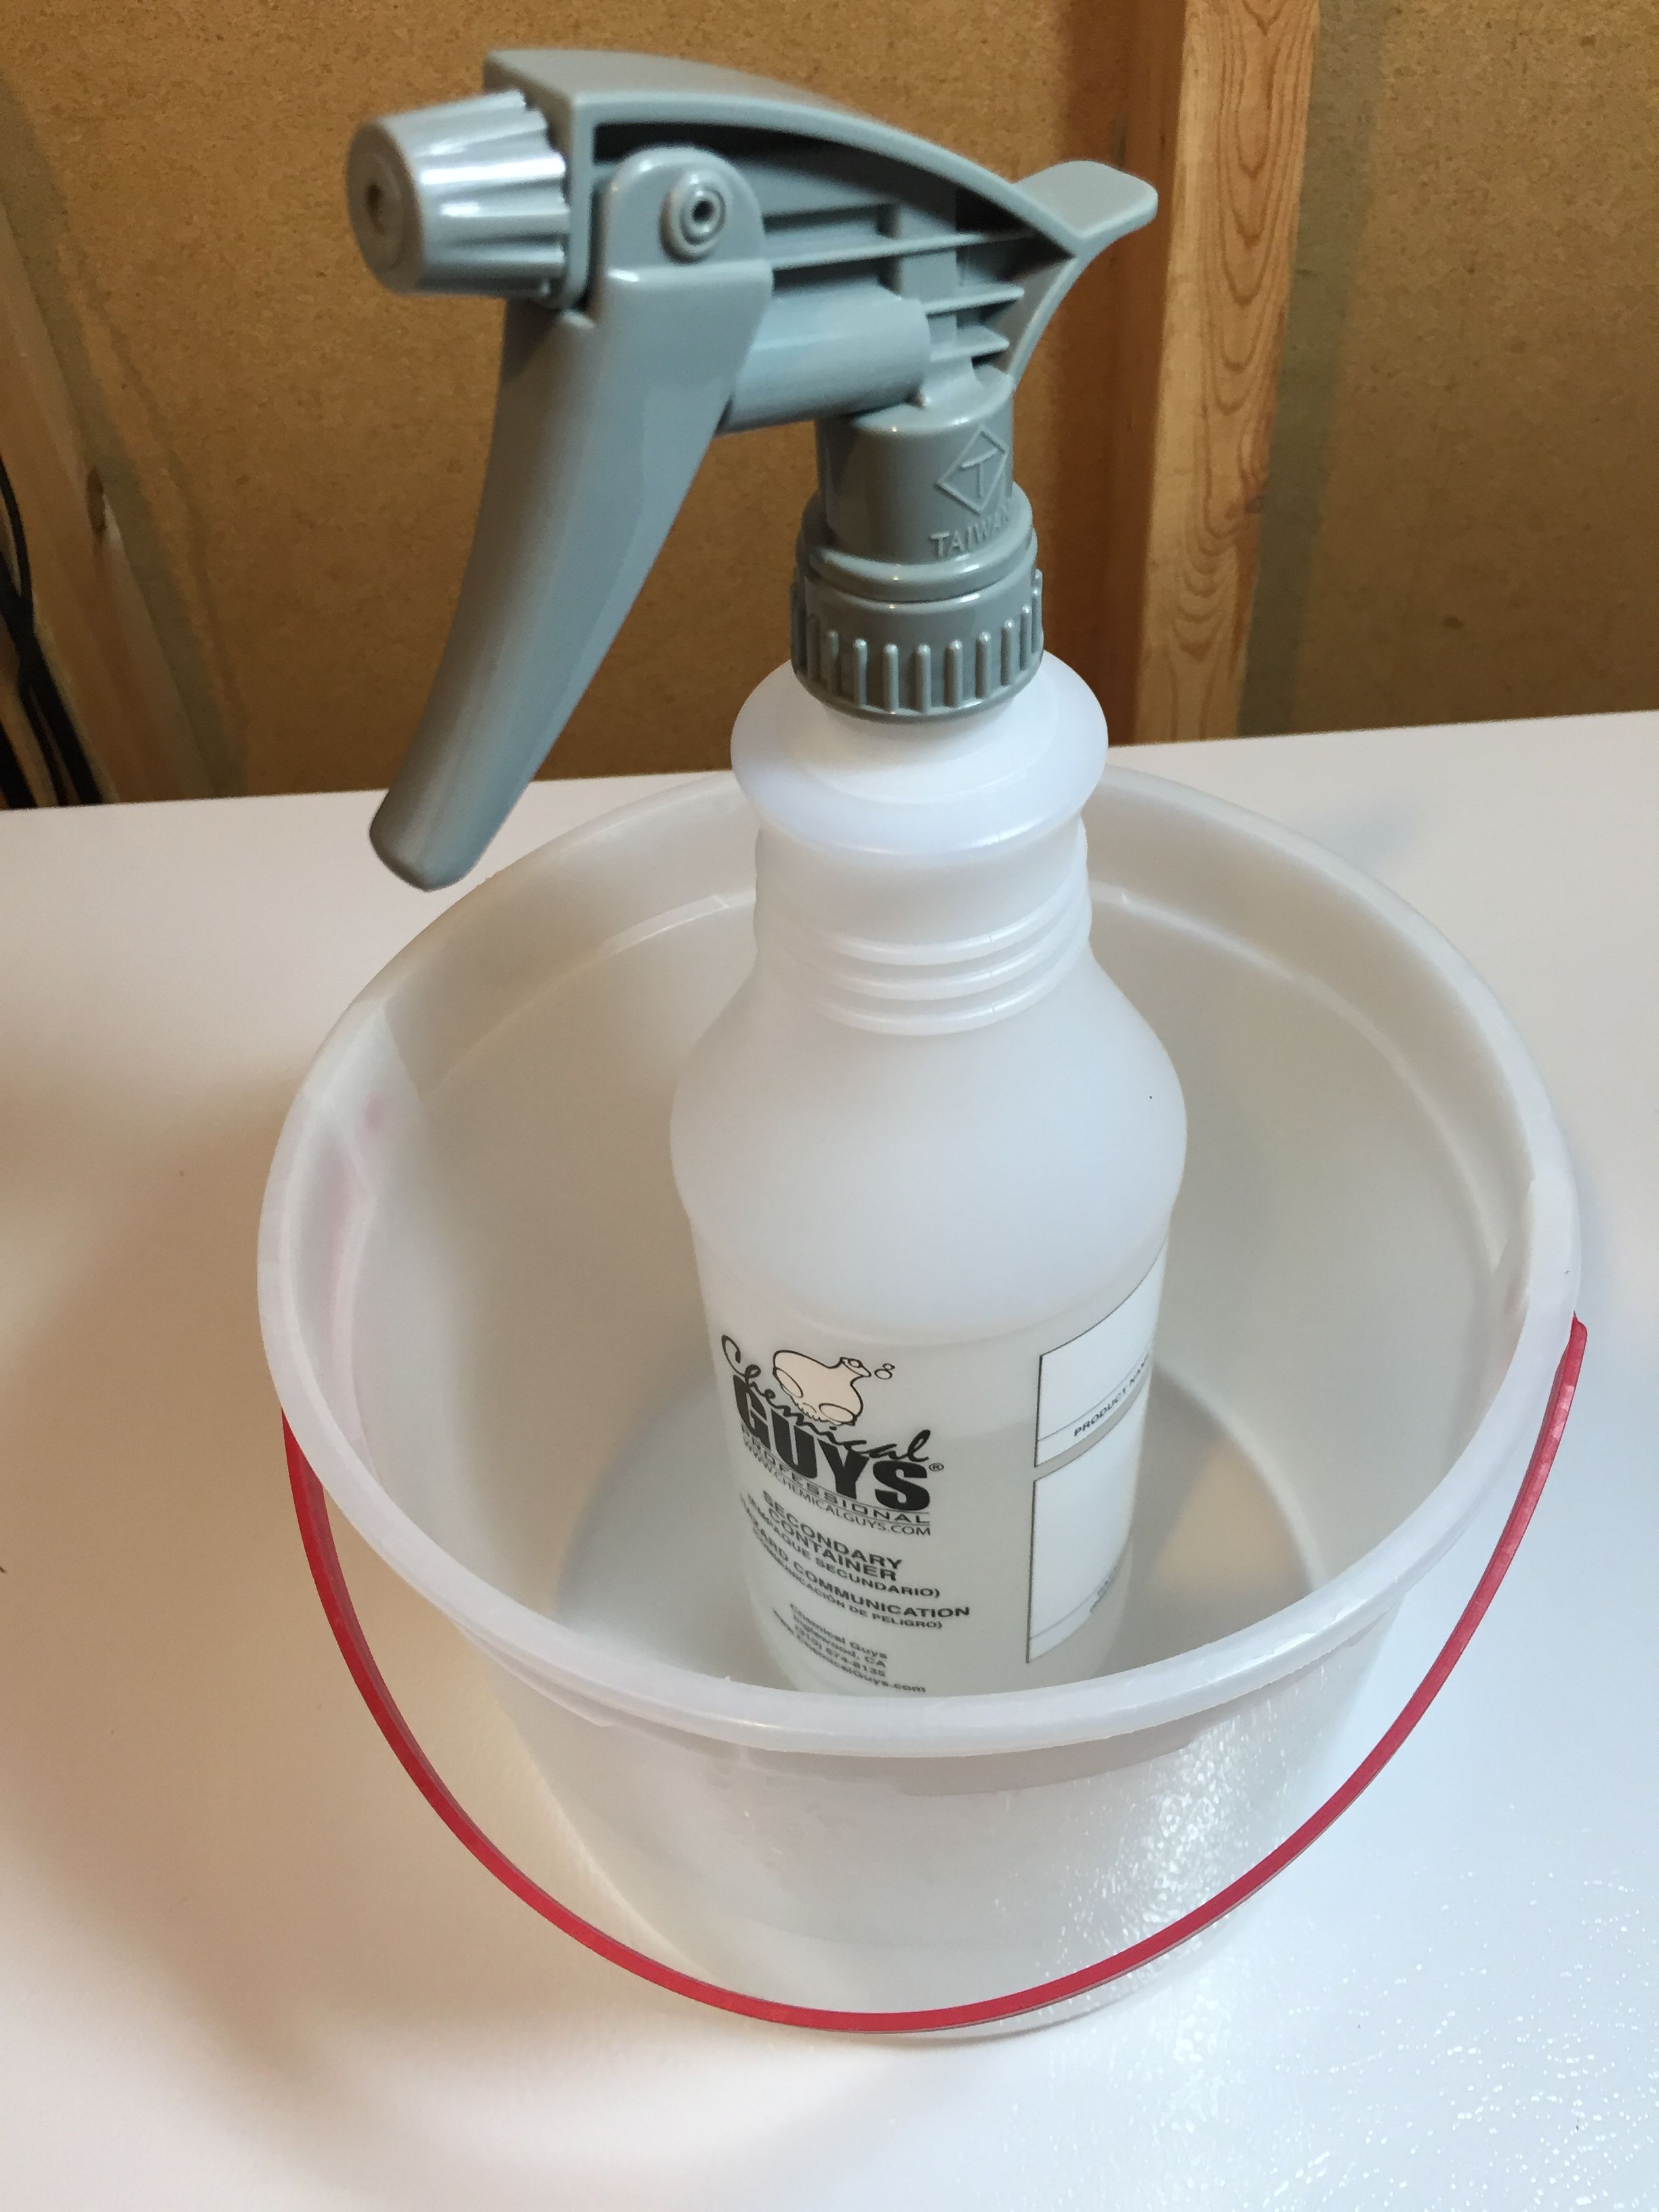 Chemical Resistant Heavy Duty Sprayer + Hands on Review & Star San Tips